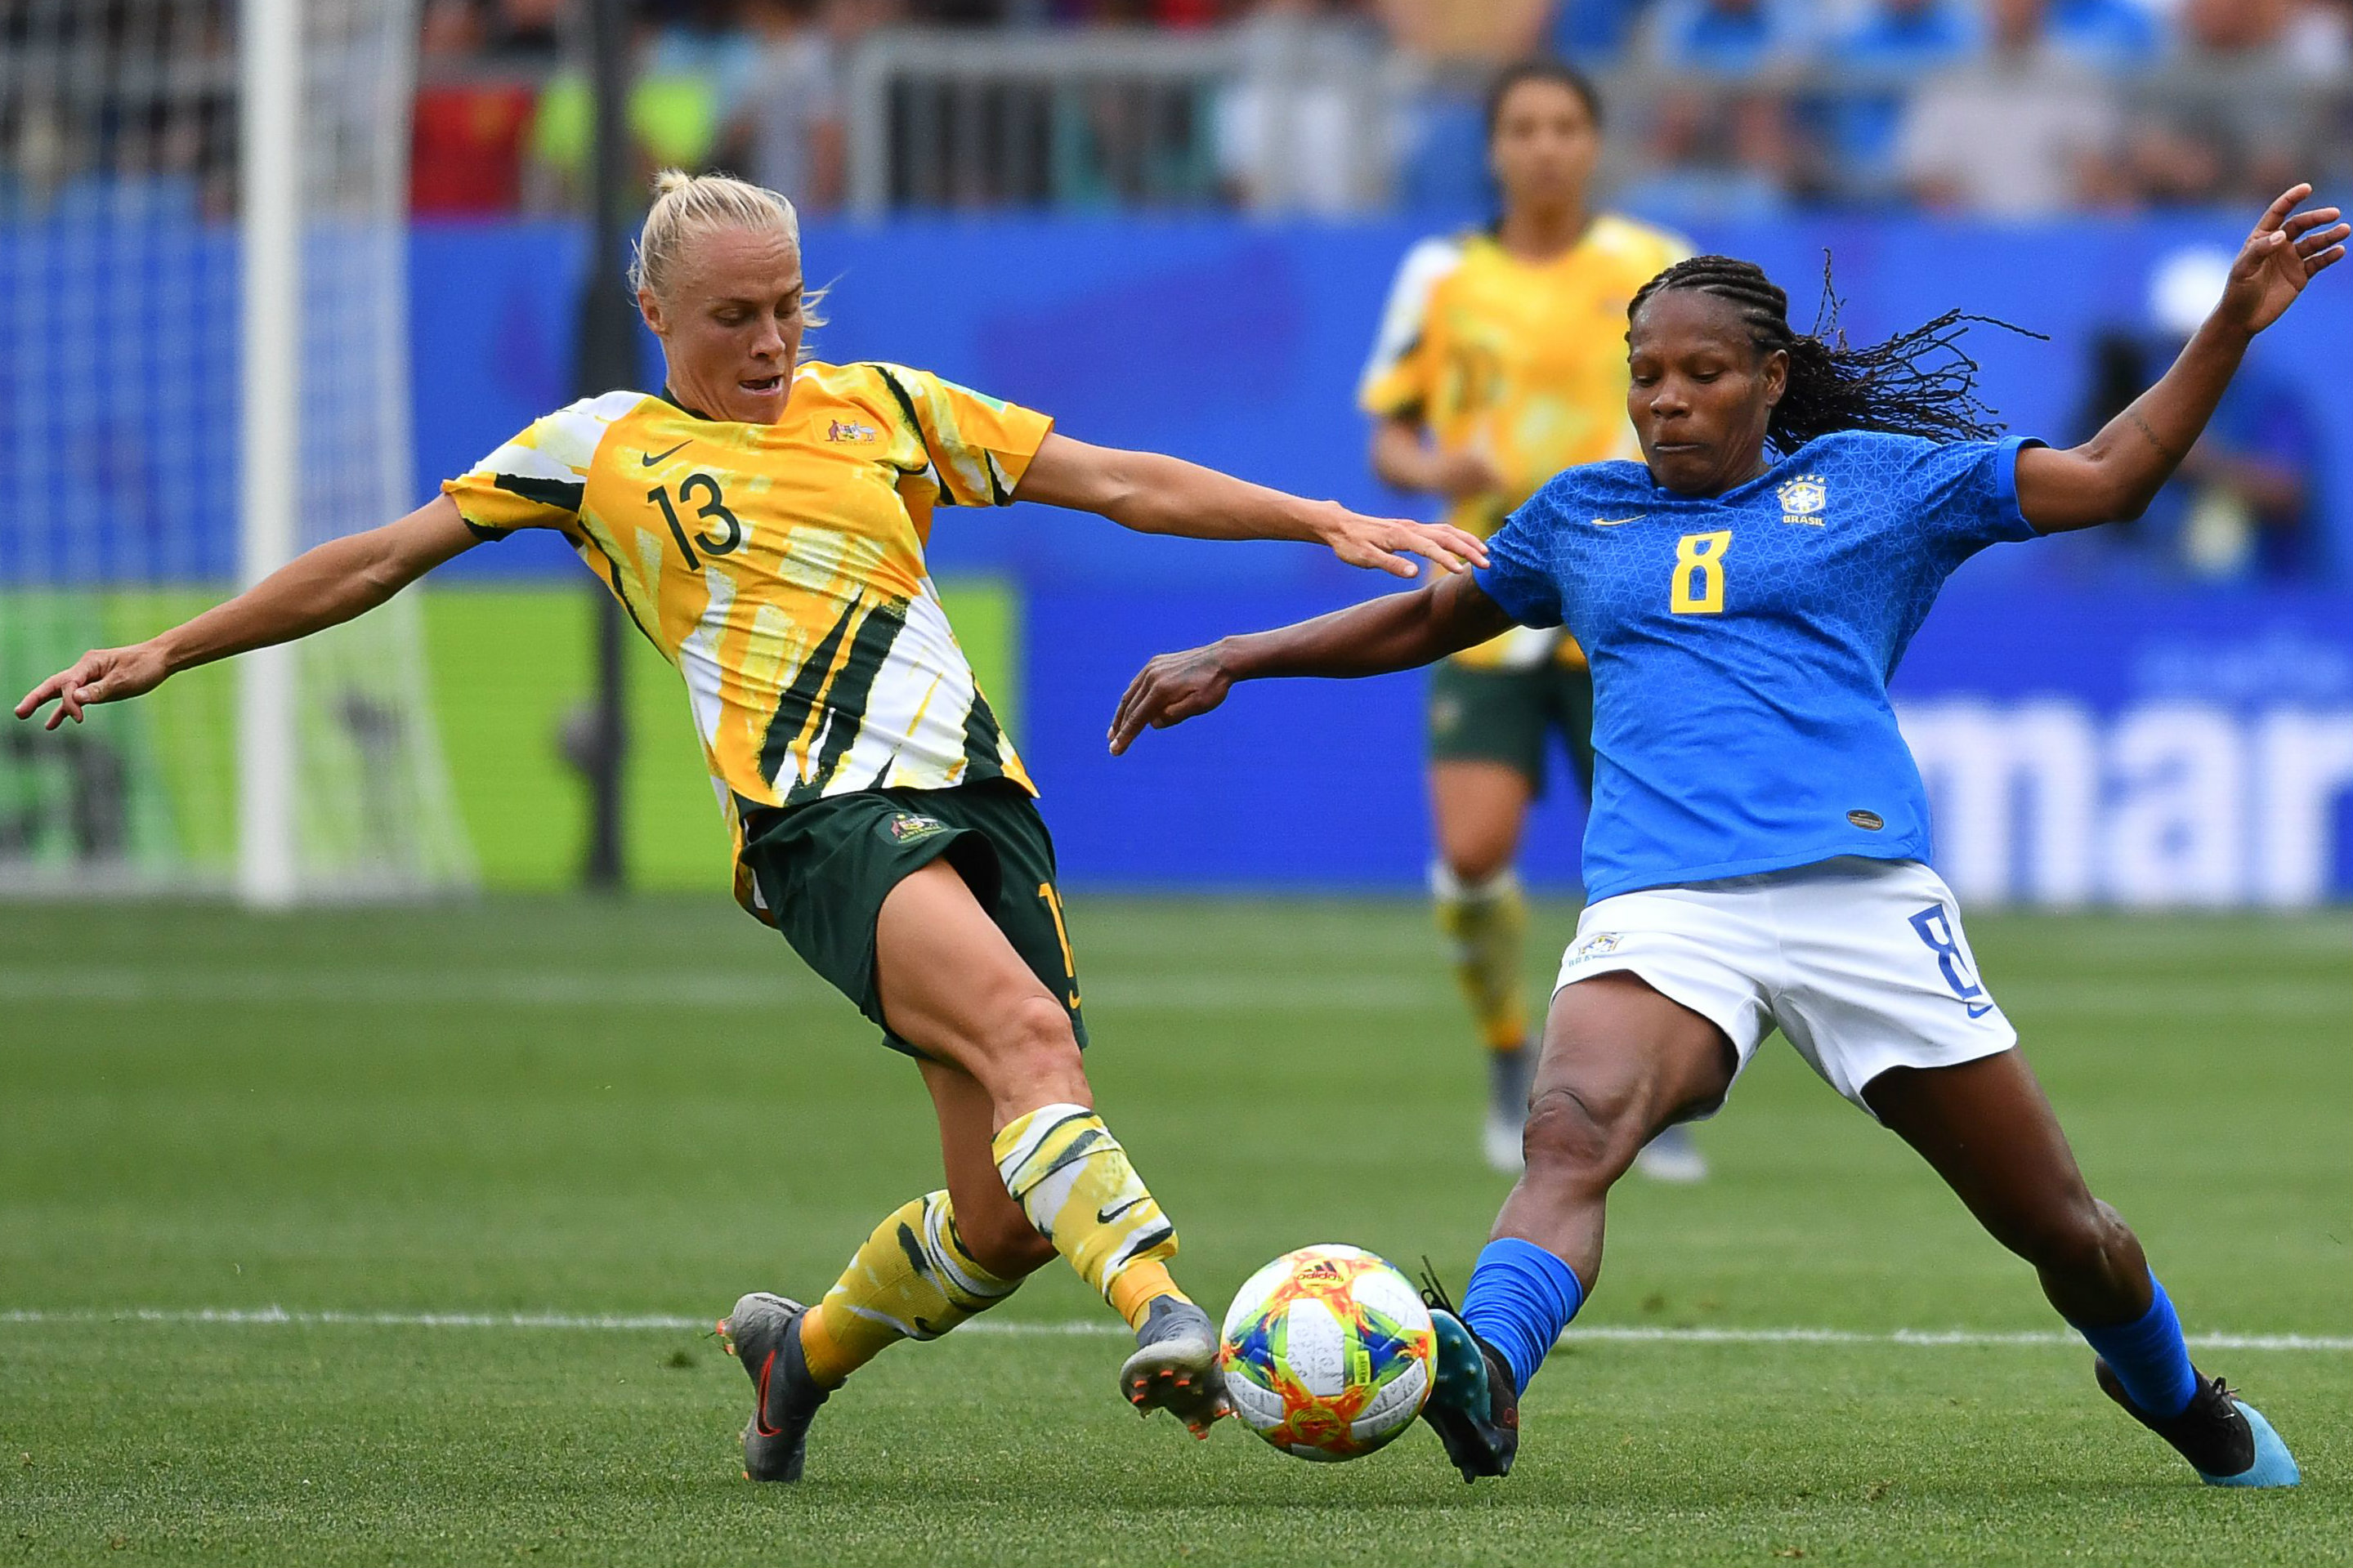 Tameka Yallop was everywhere in midfield for the Matildas